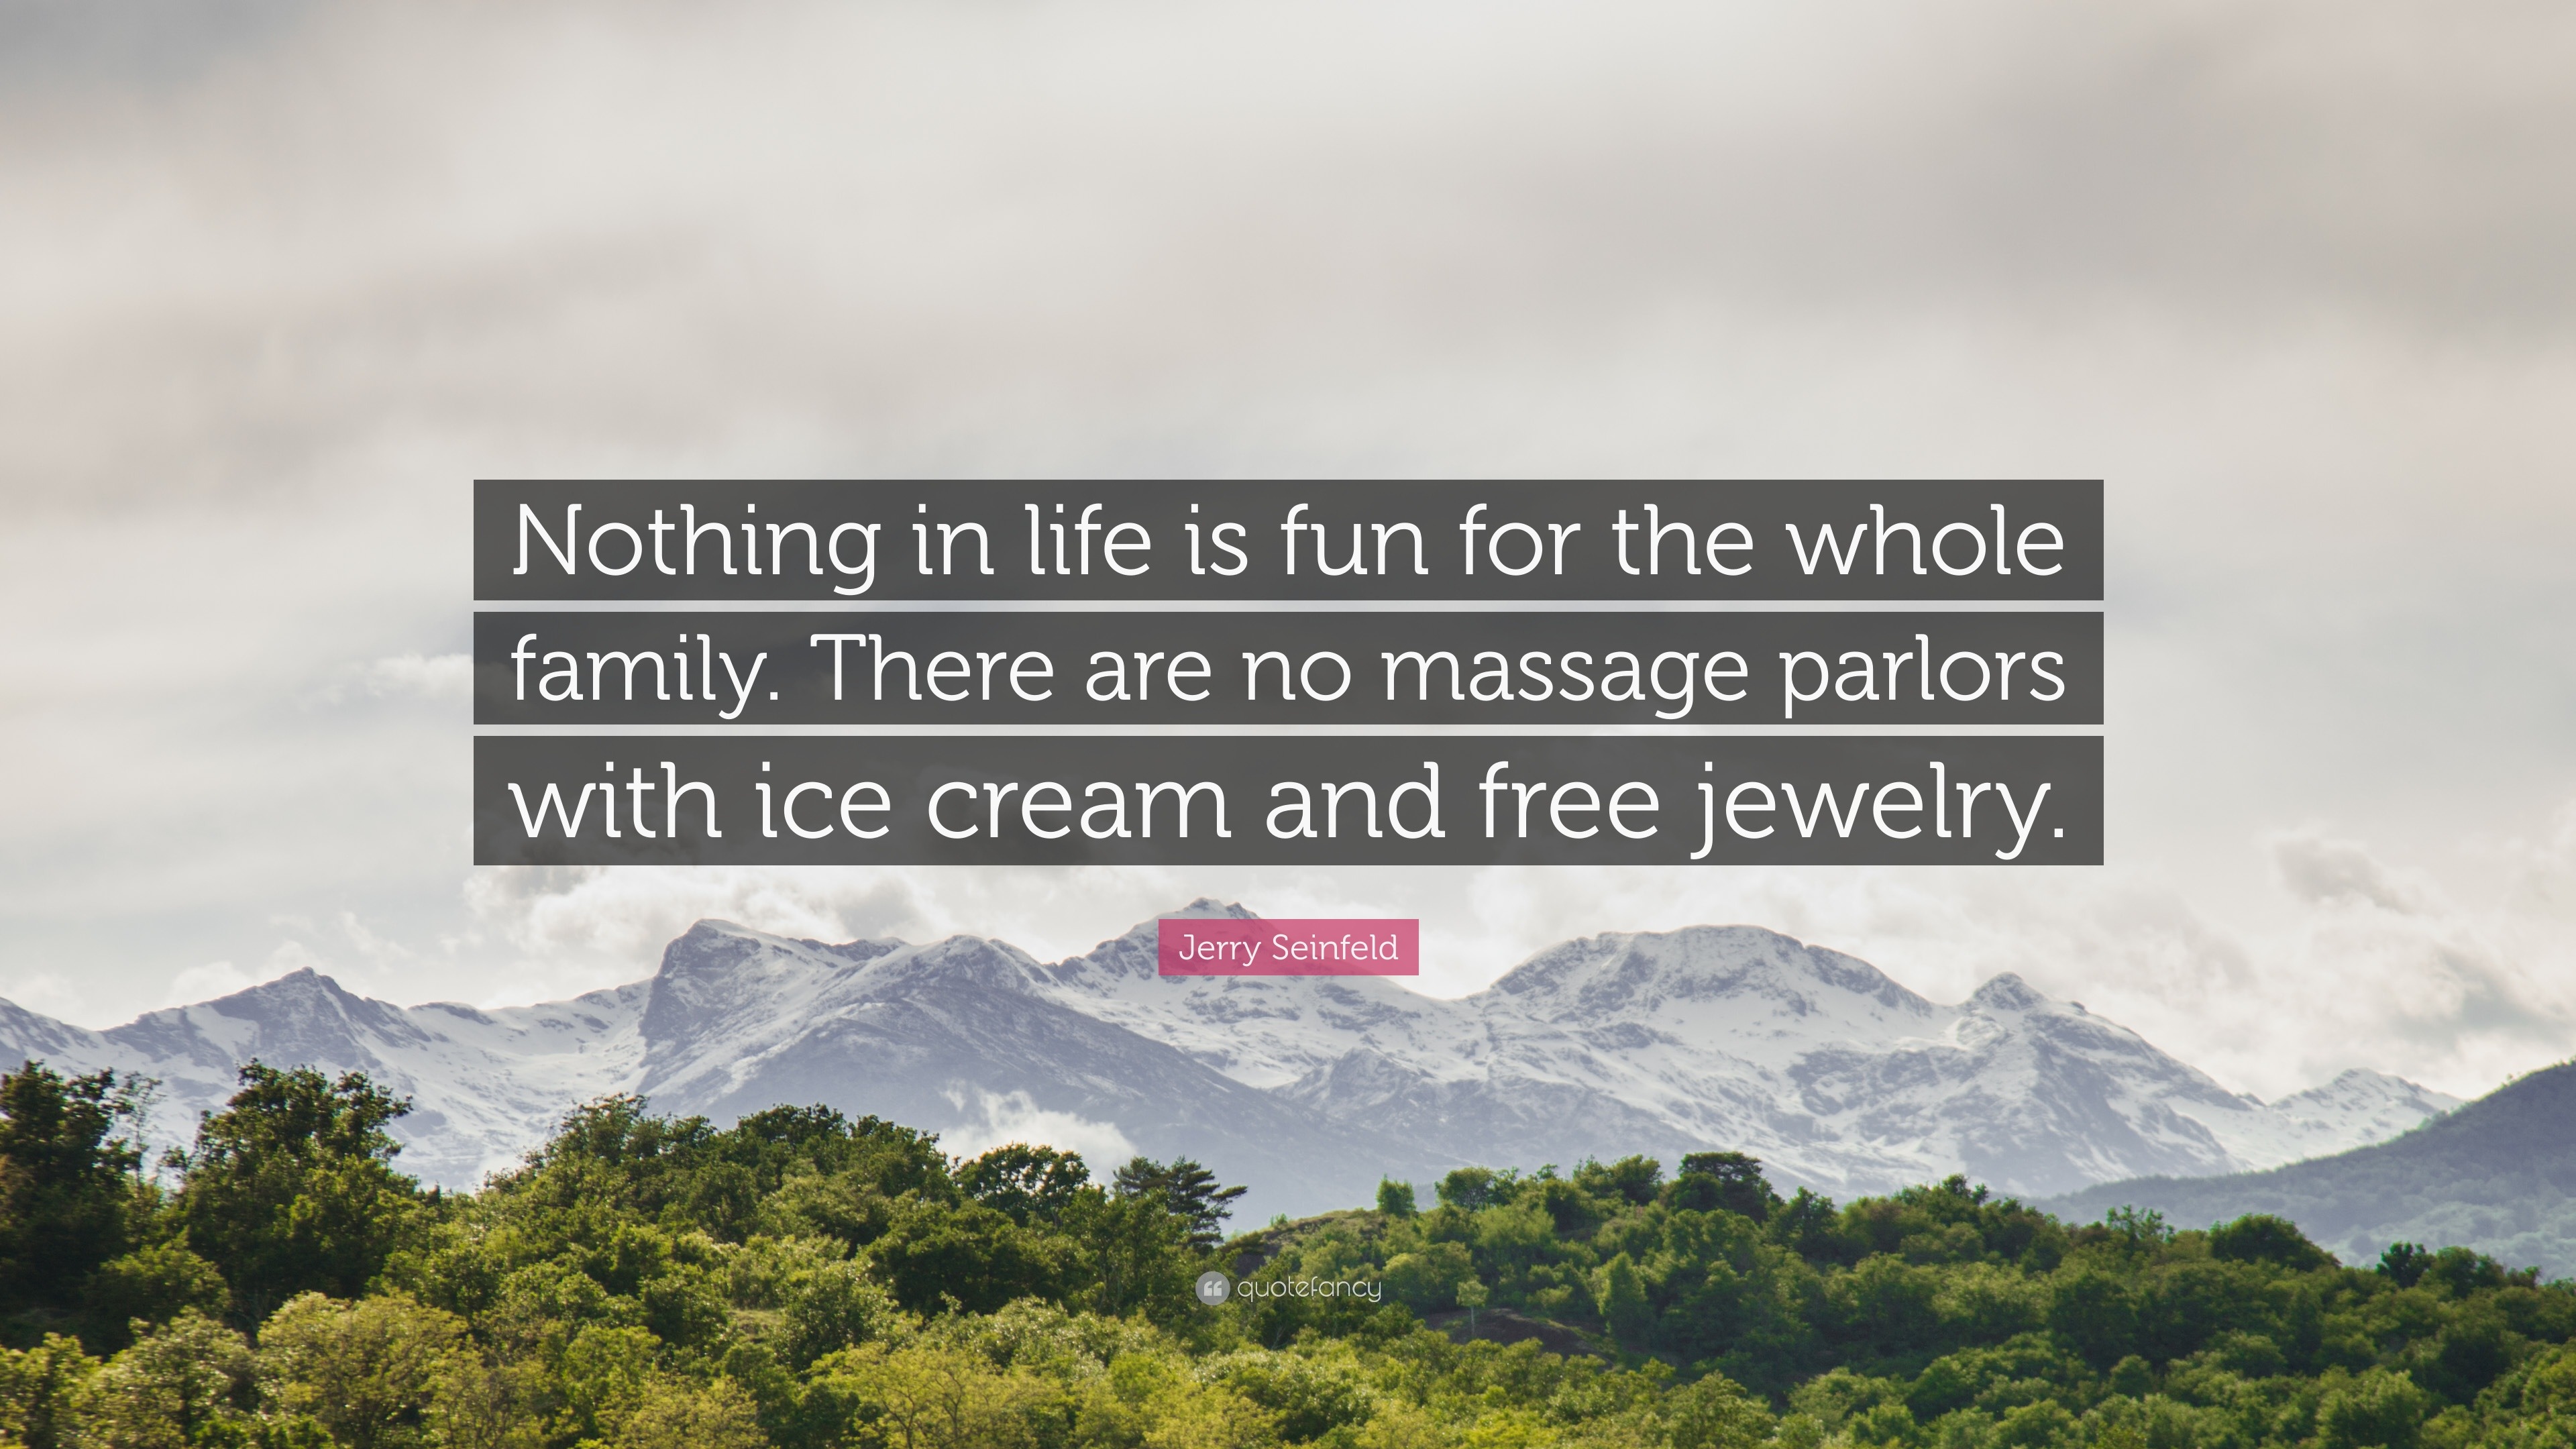 Jerry Seinfeld Quote “Nothing in life is fun for the whole family There